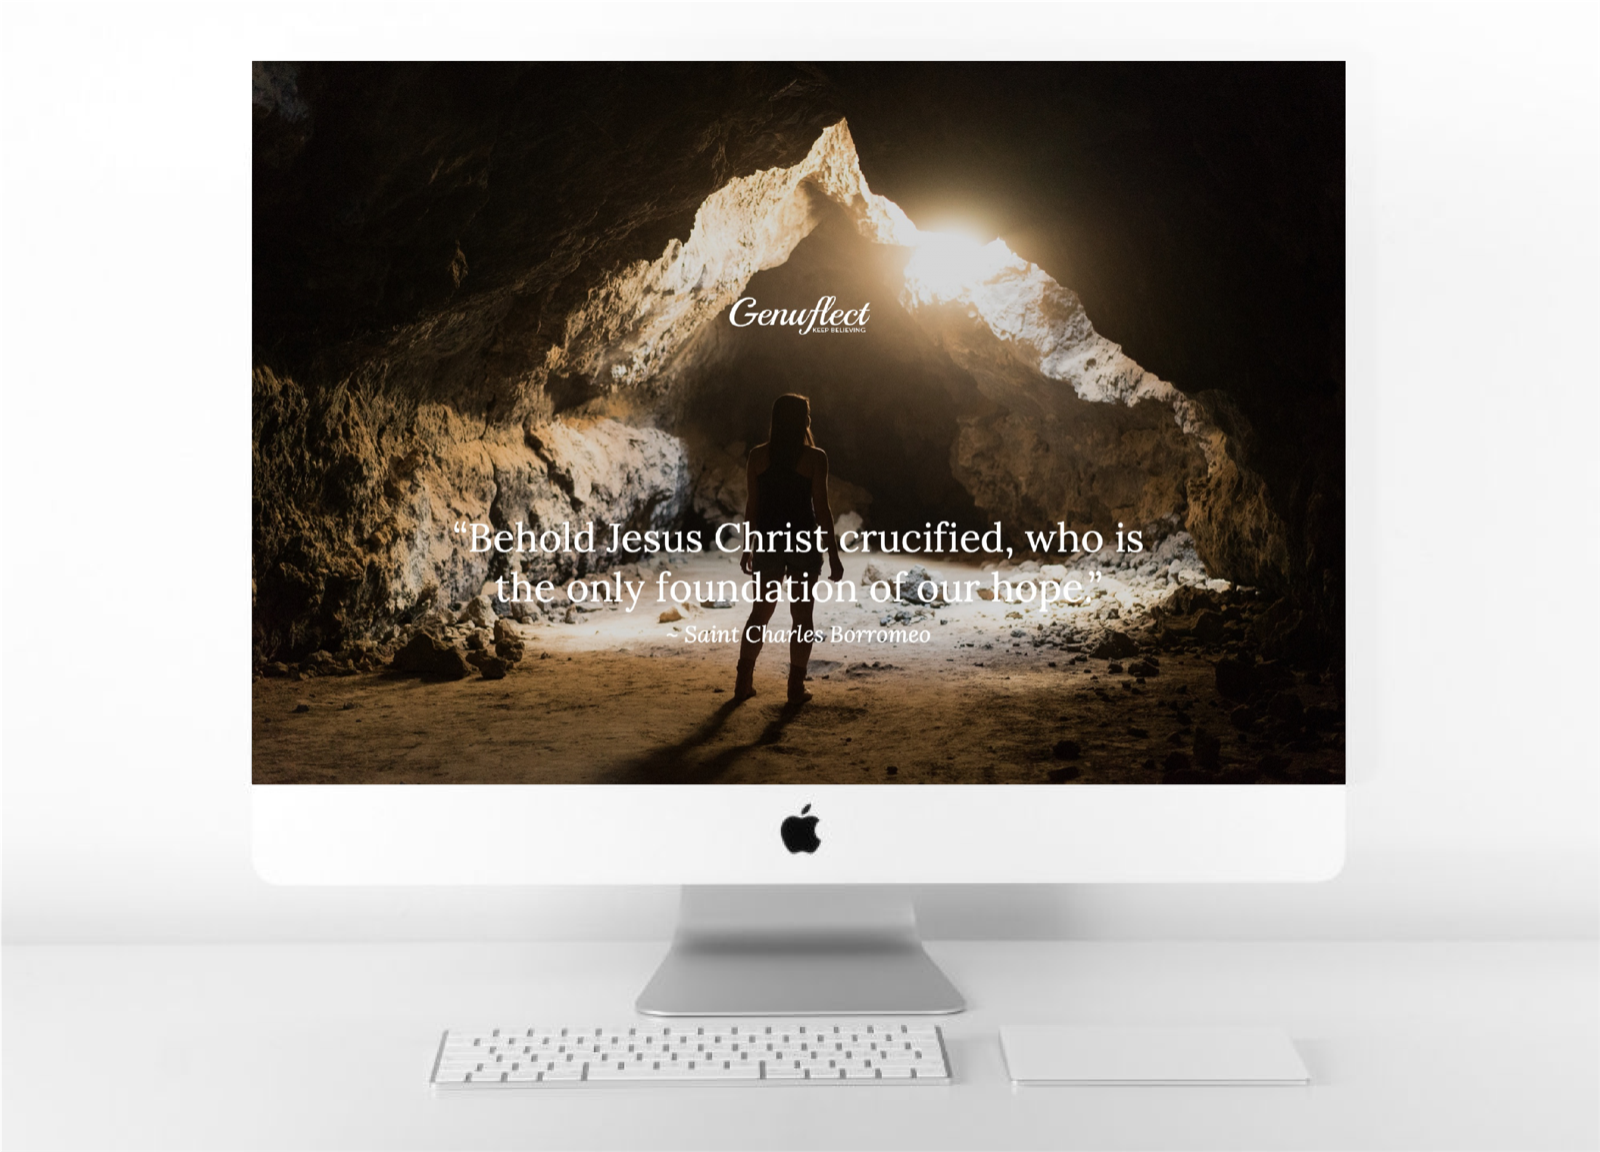 Genuflect - Background image on computer of woman in cave with bright sun shining from above